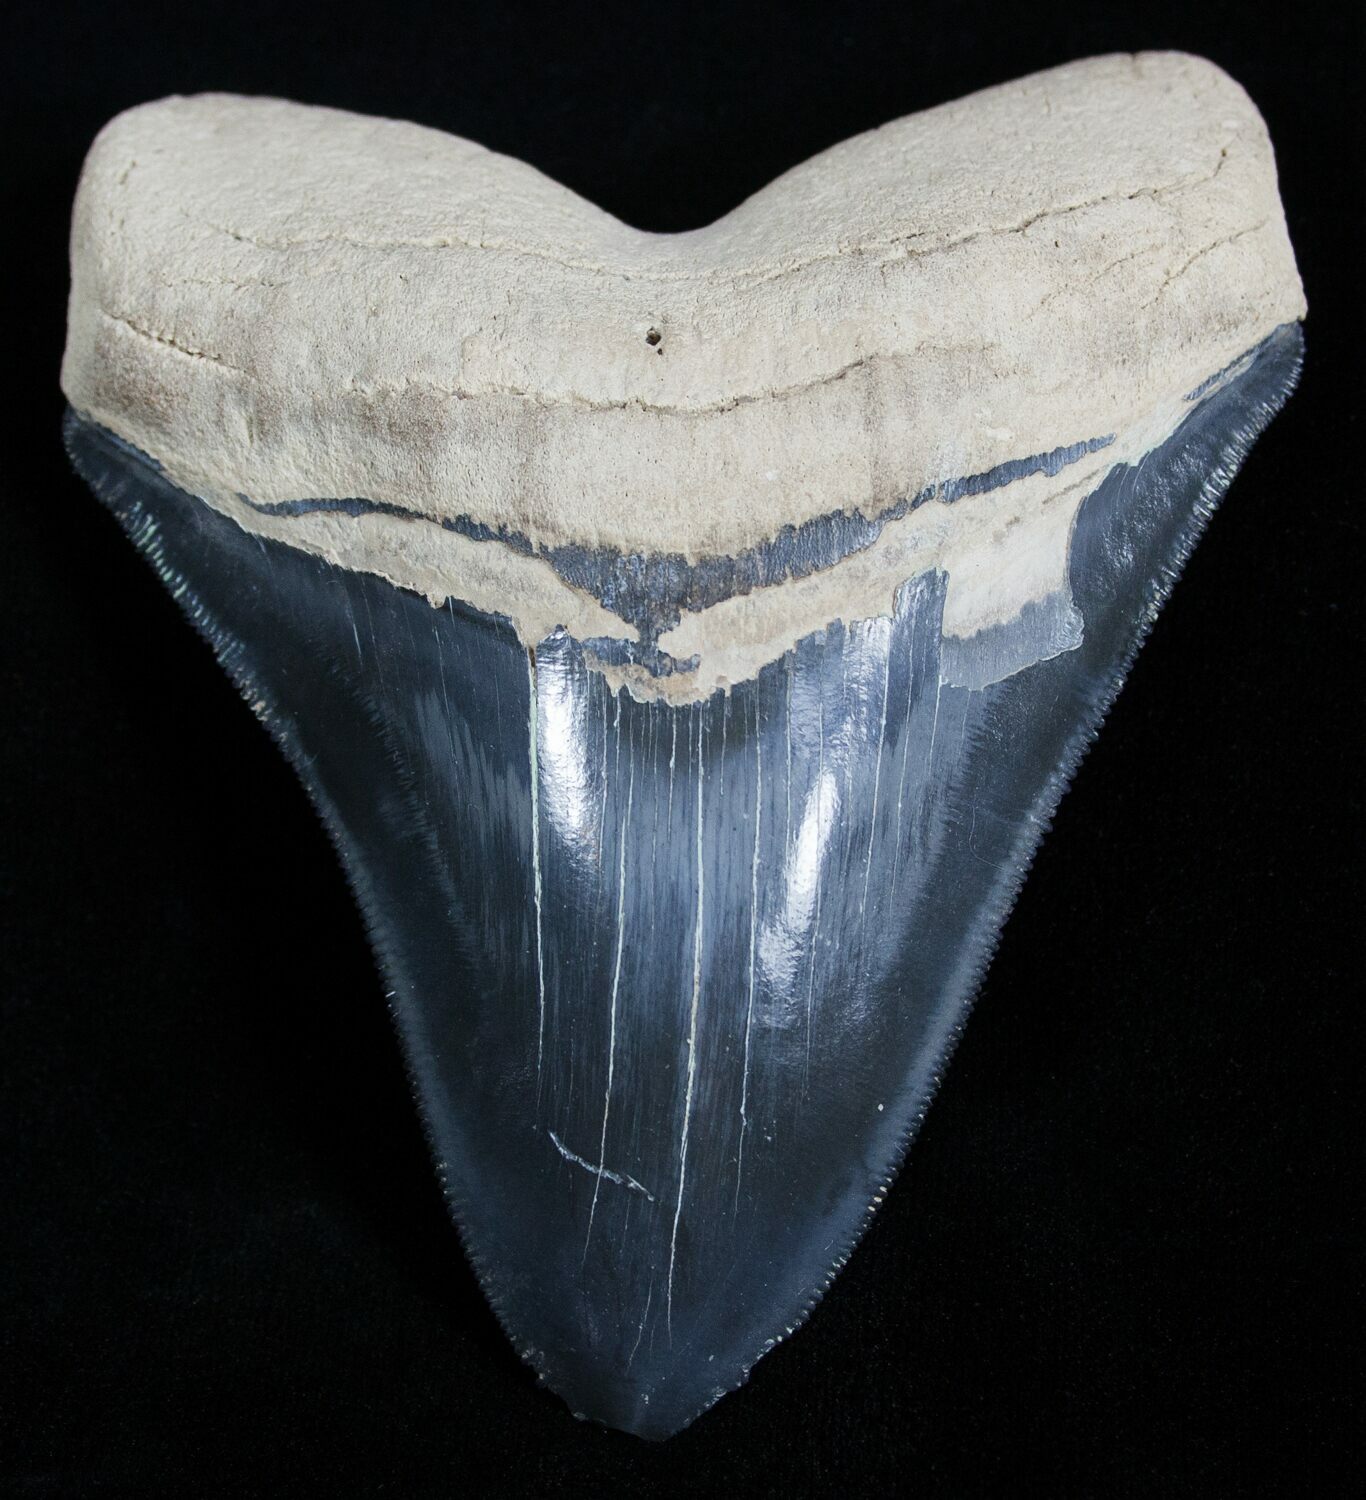 Large 4+ Inch Bone Valley Megalodon Tooth For Sale (#2001) - FossilEra.com